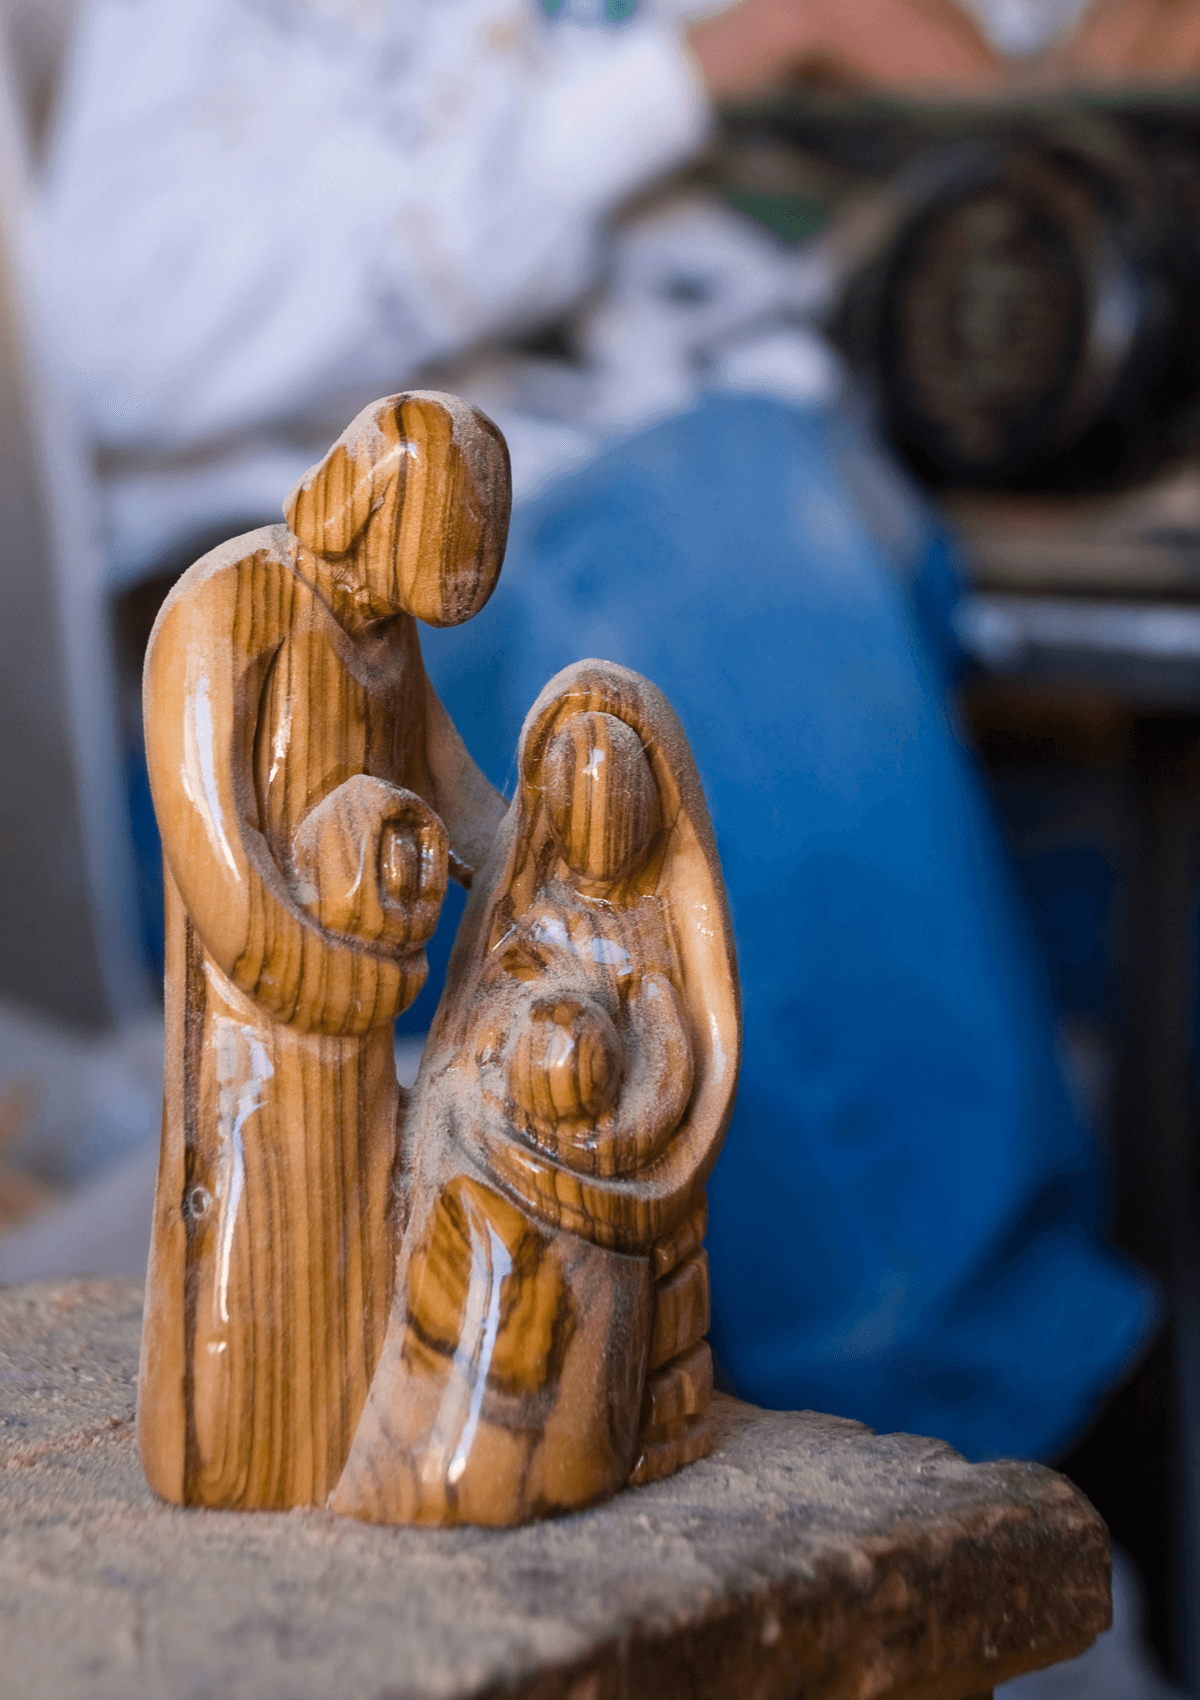 Olive wood carvings from Palestine and Israeli region